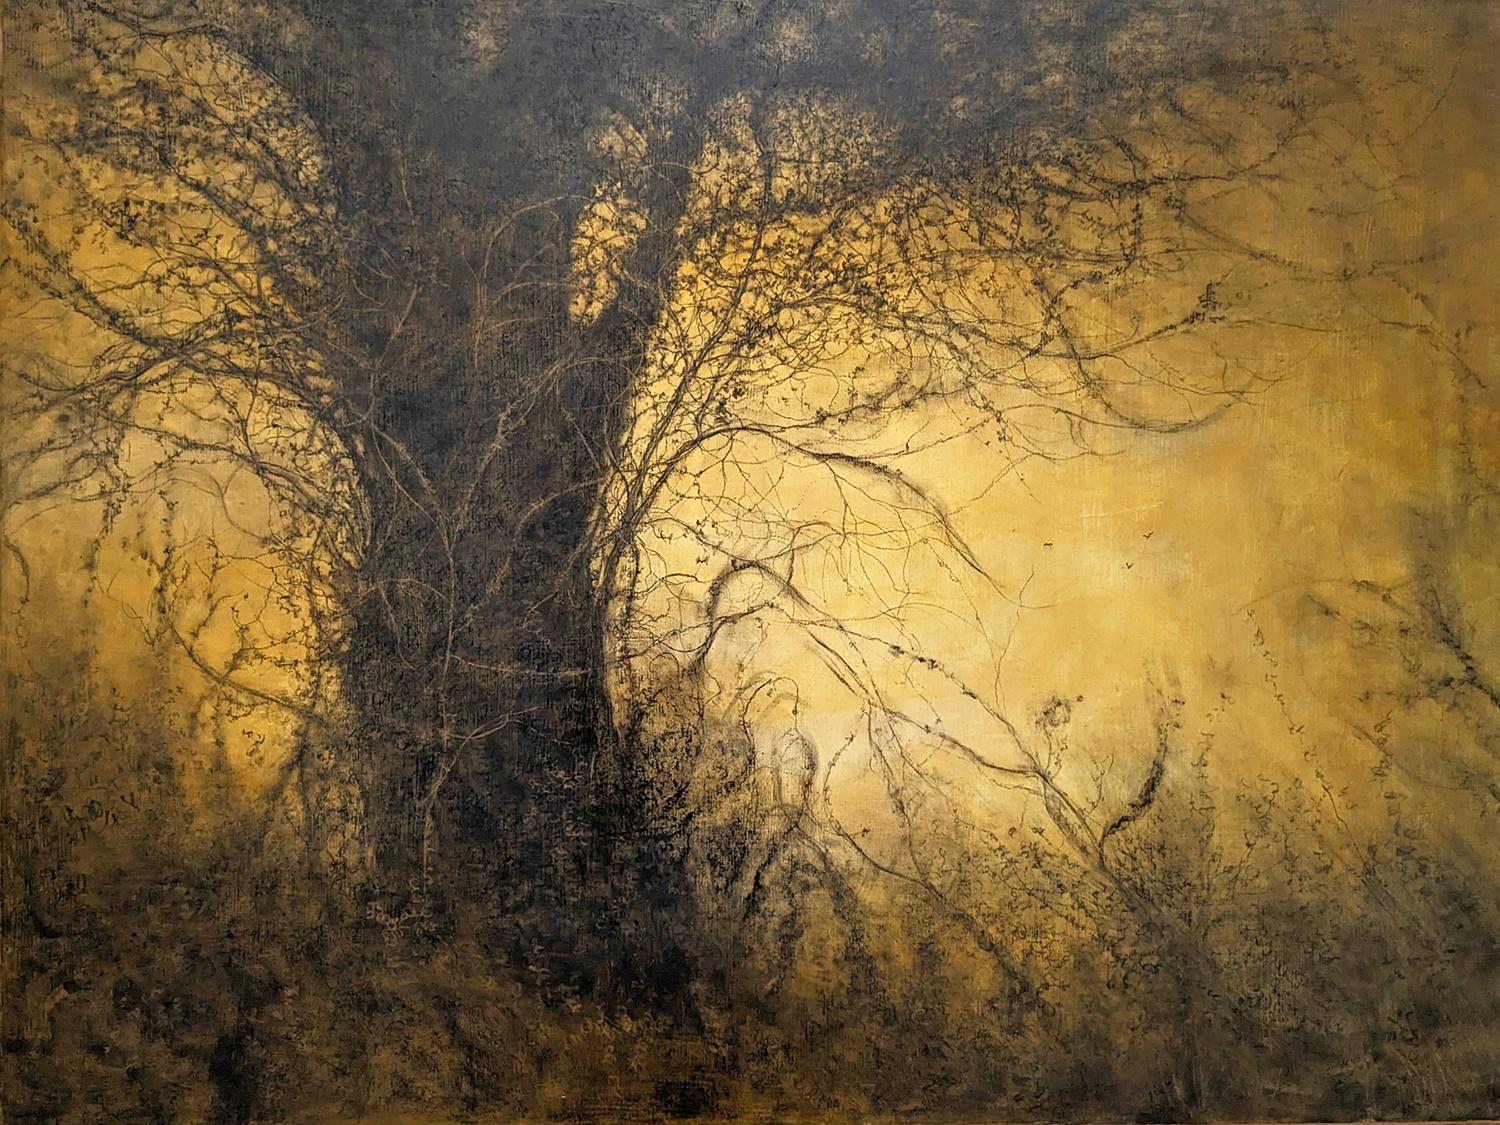 The Golden Hour (Sun-Washed Landscape Charcoal Drawing of Trees in Forest)